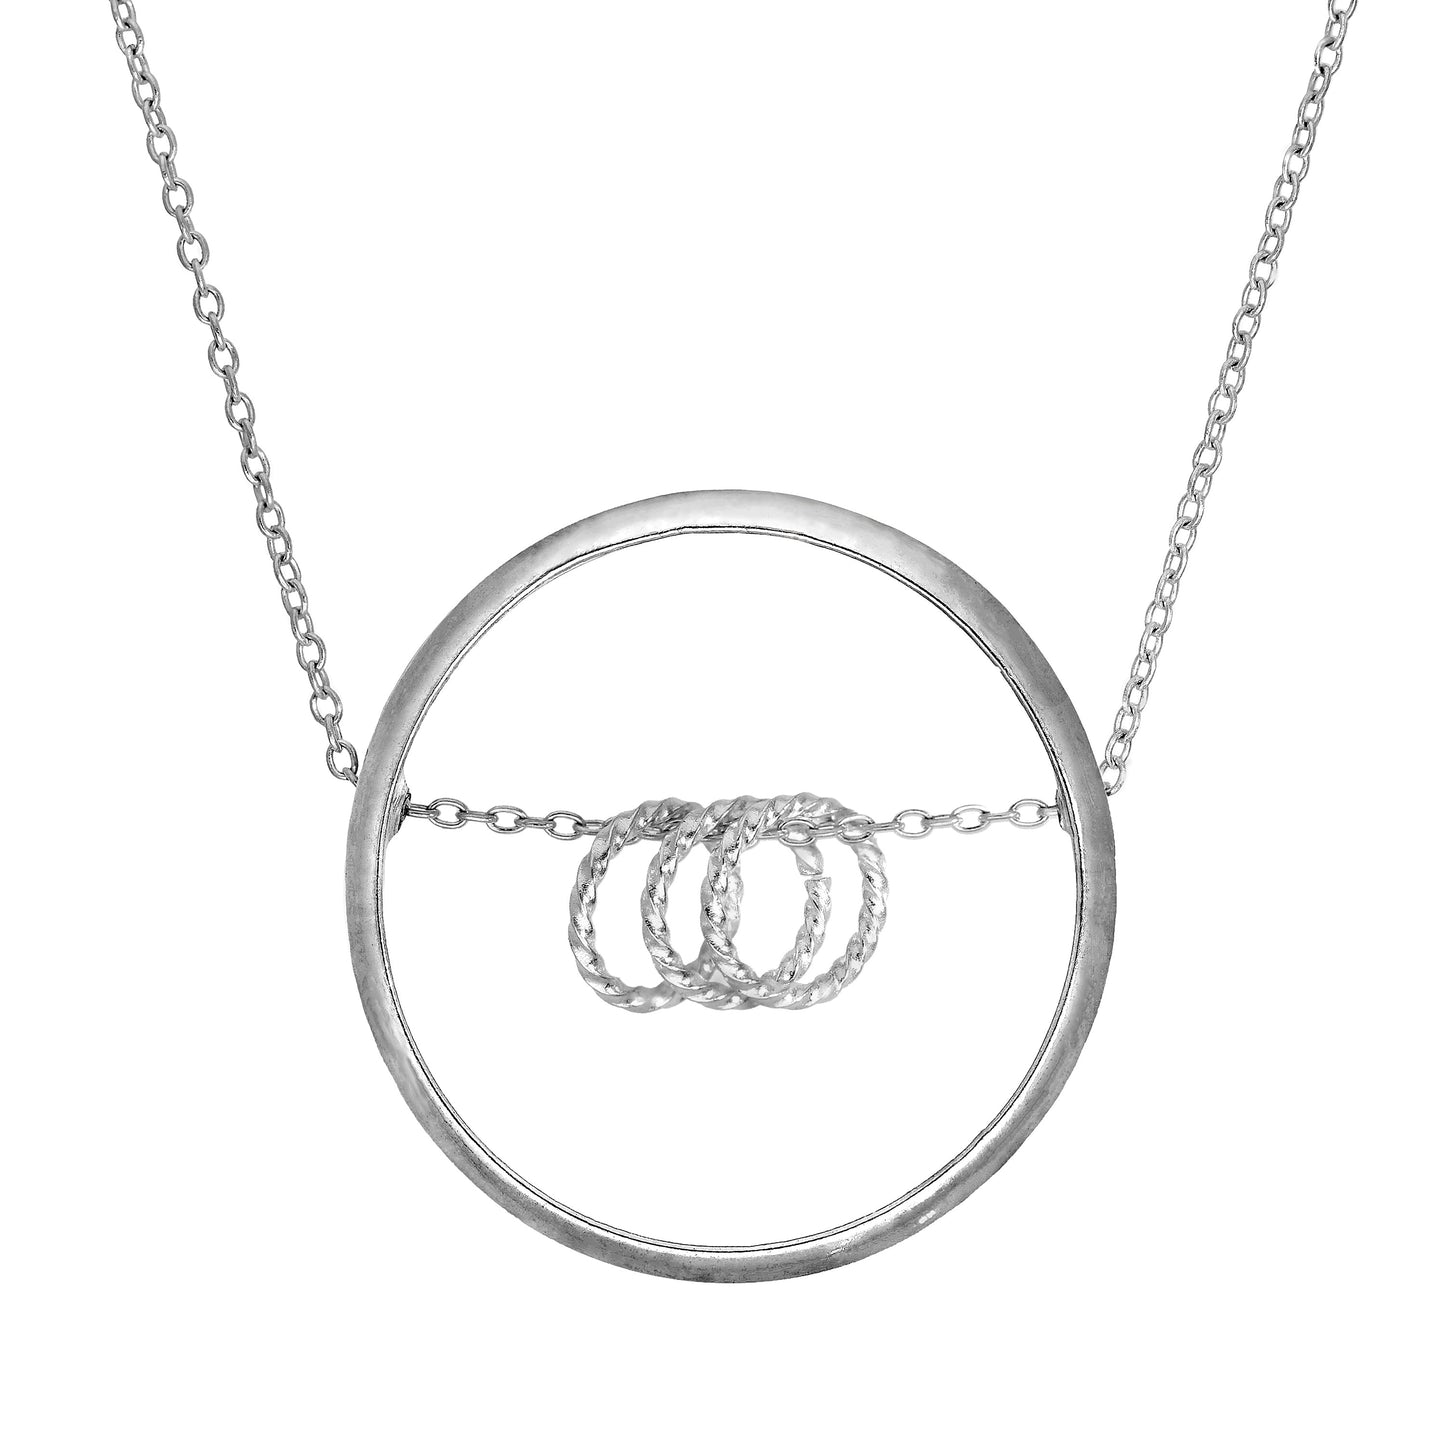 Sterling Silver Karma Moments Triple Ring Pendant on Belcher Chain 16-22 Inches